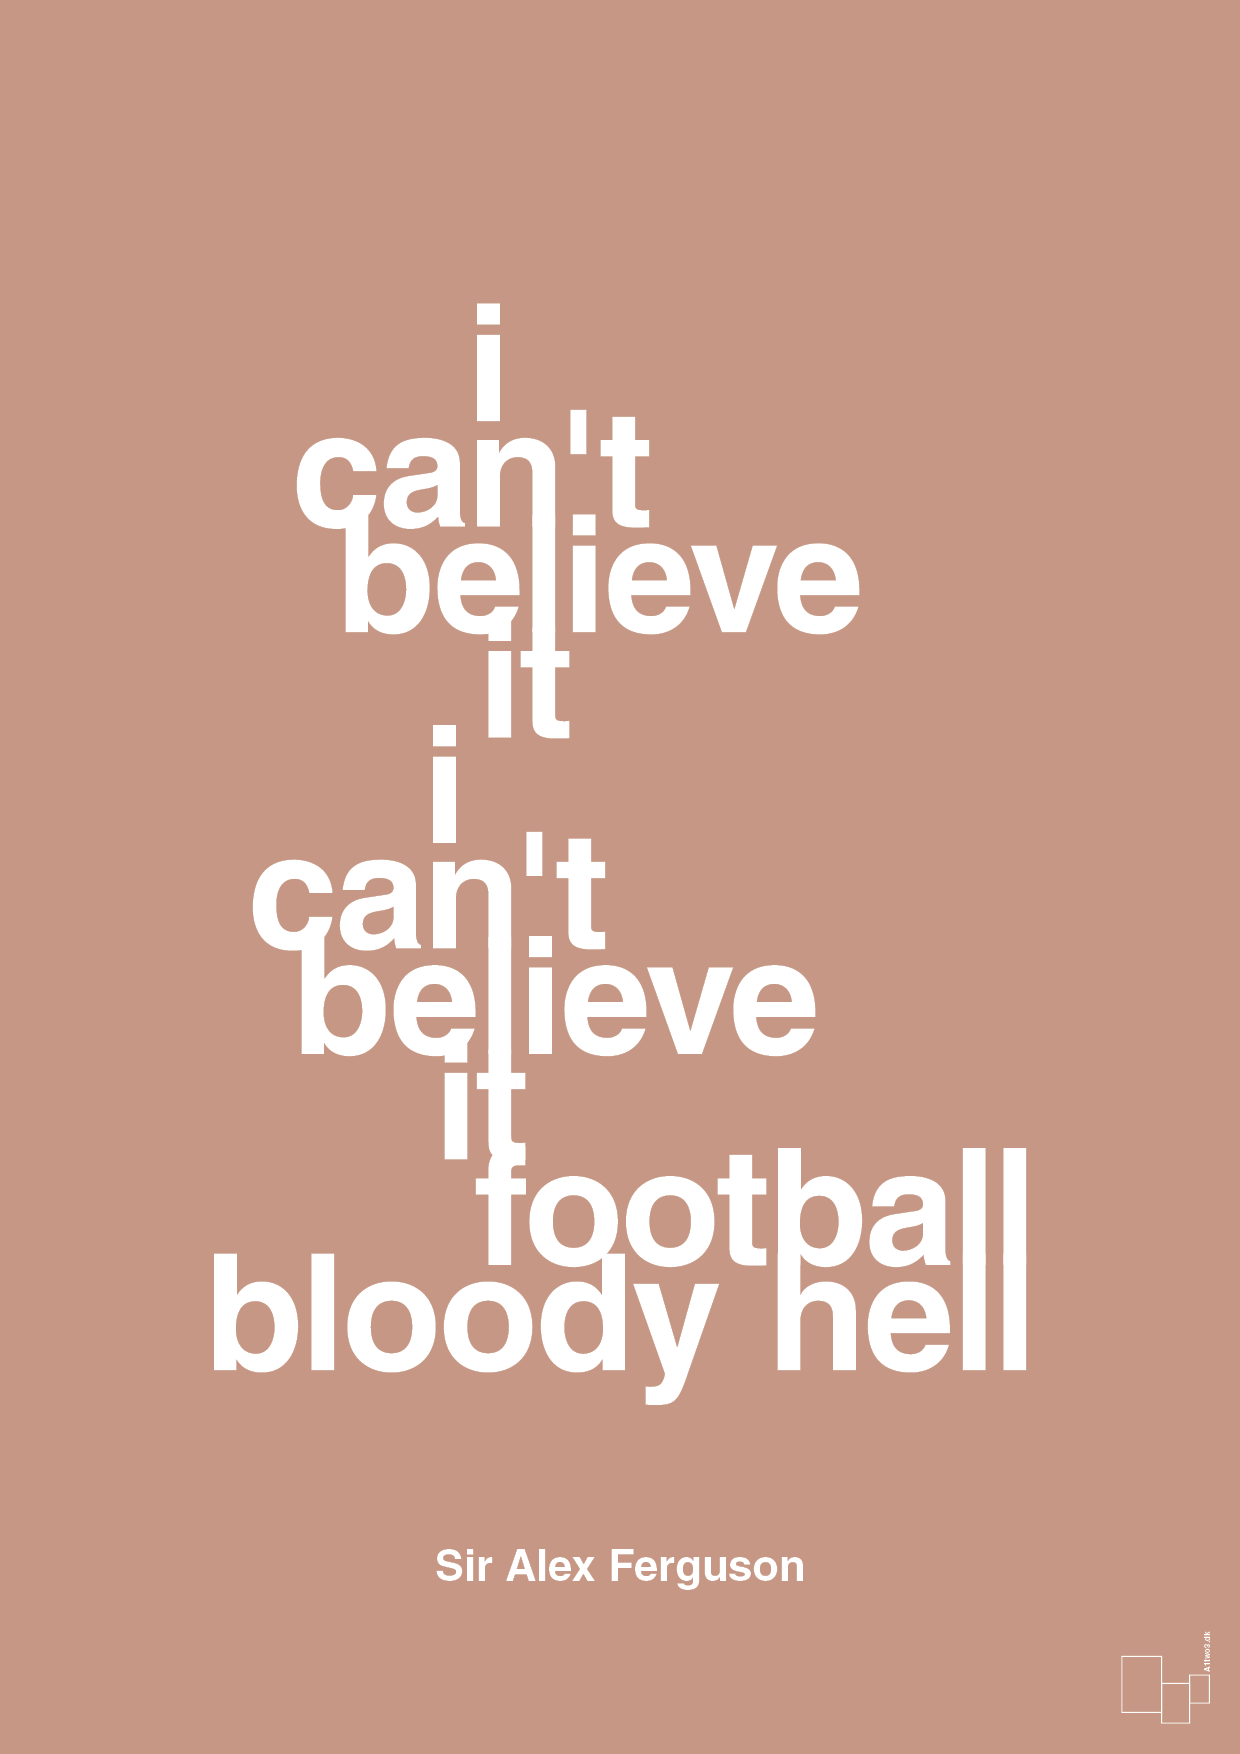 i can't believe it i can't believe it football bloody hell - Plakat med Citater i Powder